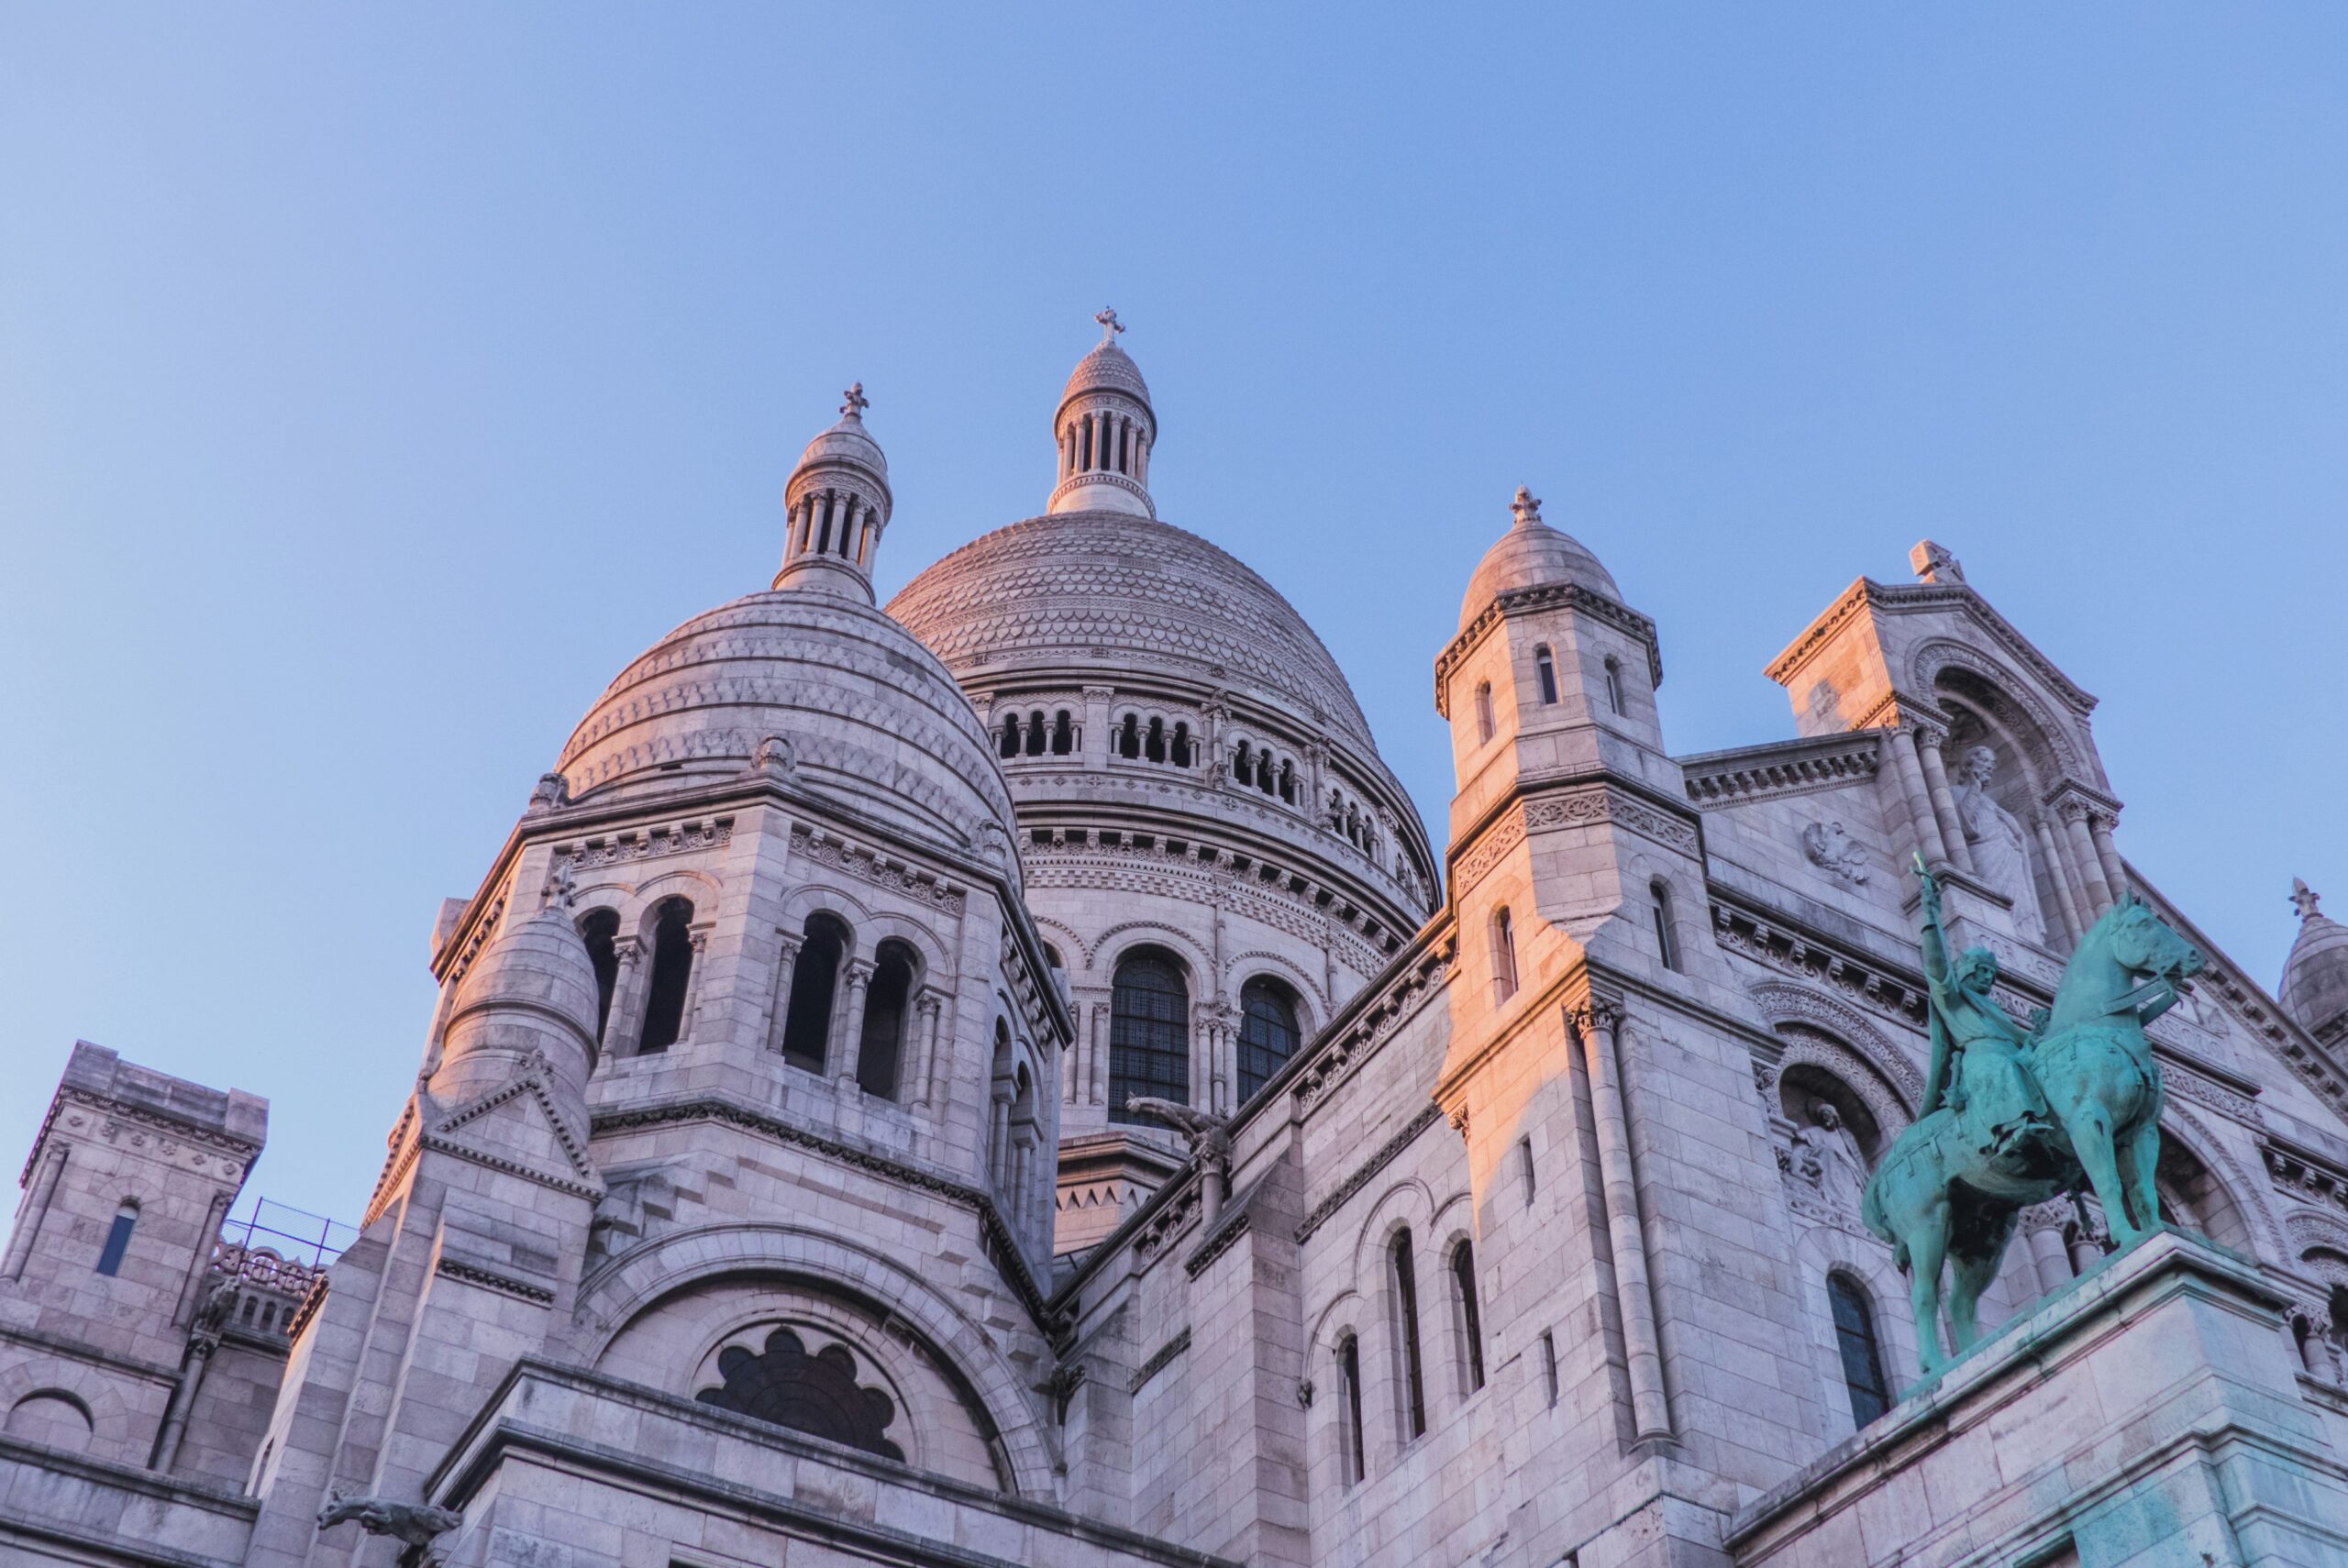 This is an image of the Sacre Coeur Cathedral at what looks like sunrise. An important thing to know before visiting Paris is that there are lots of free activities (including most churches and cathedrals).